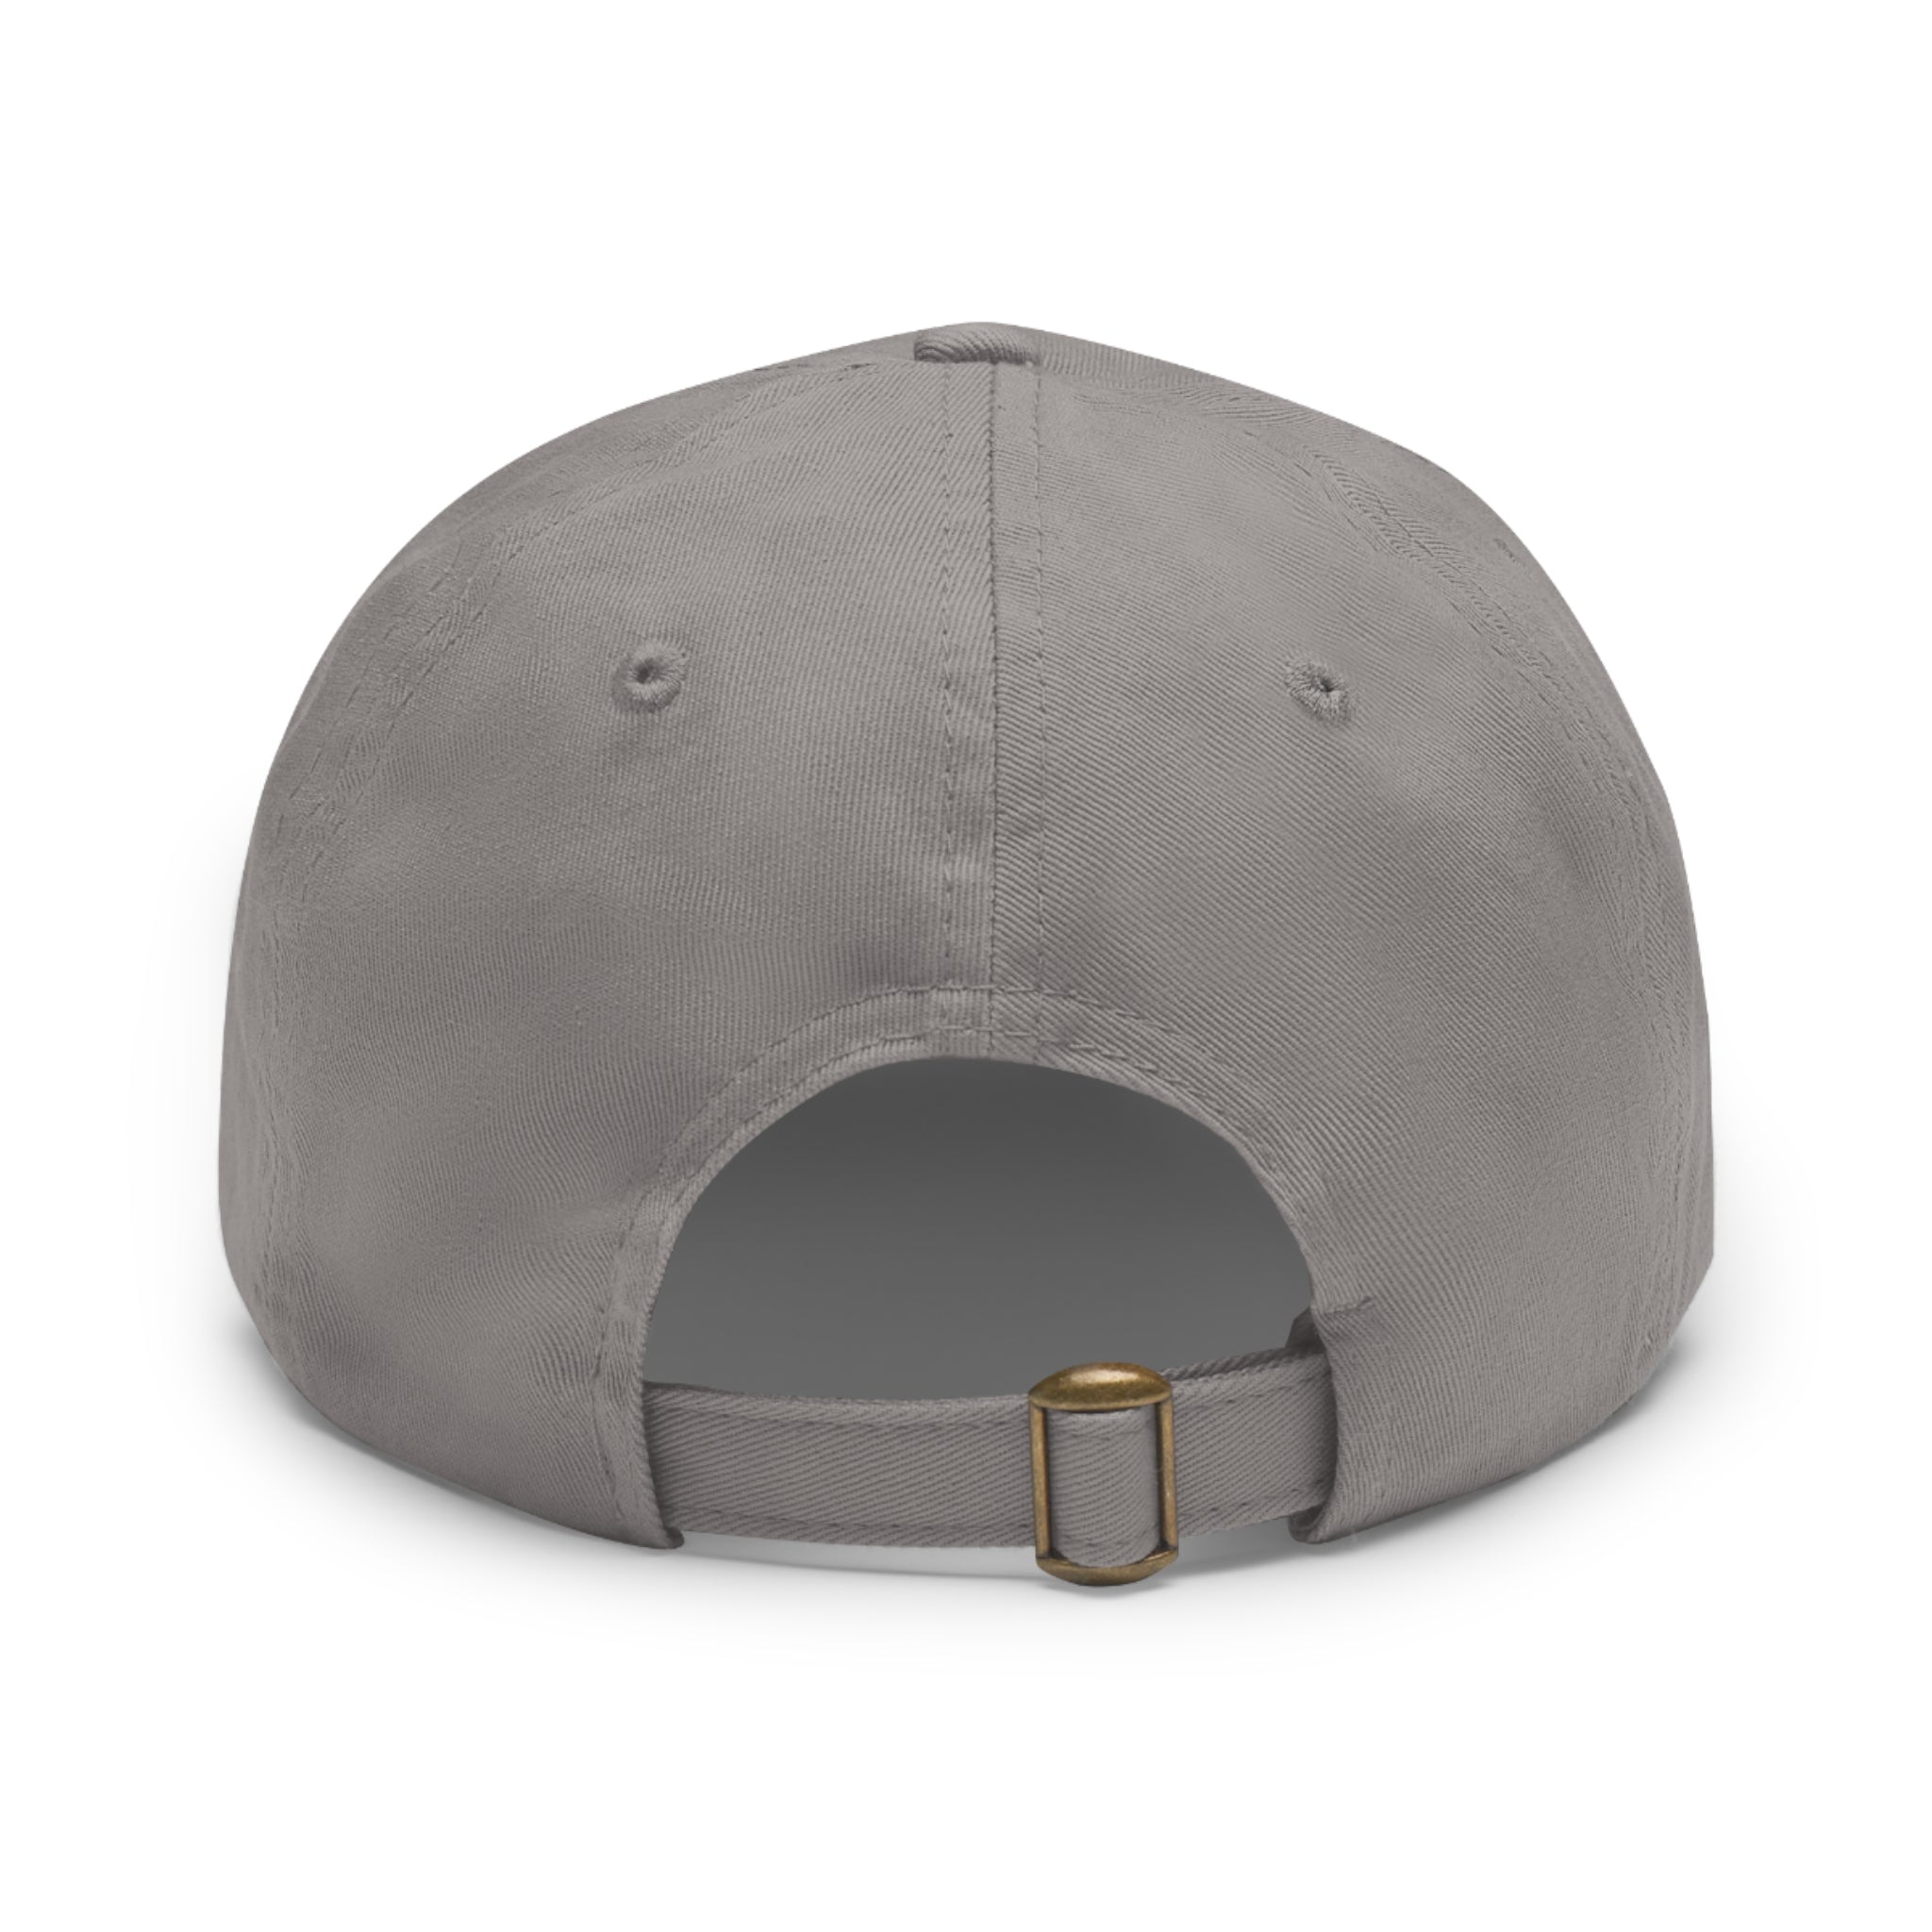 Fast Track Leather Patch Cap